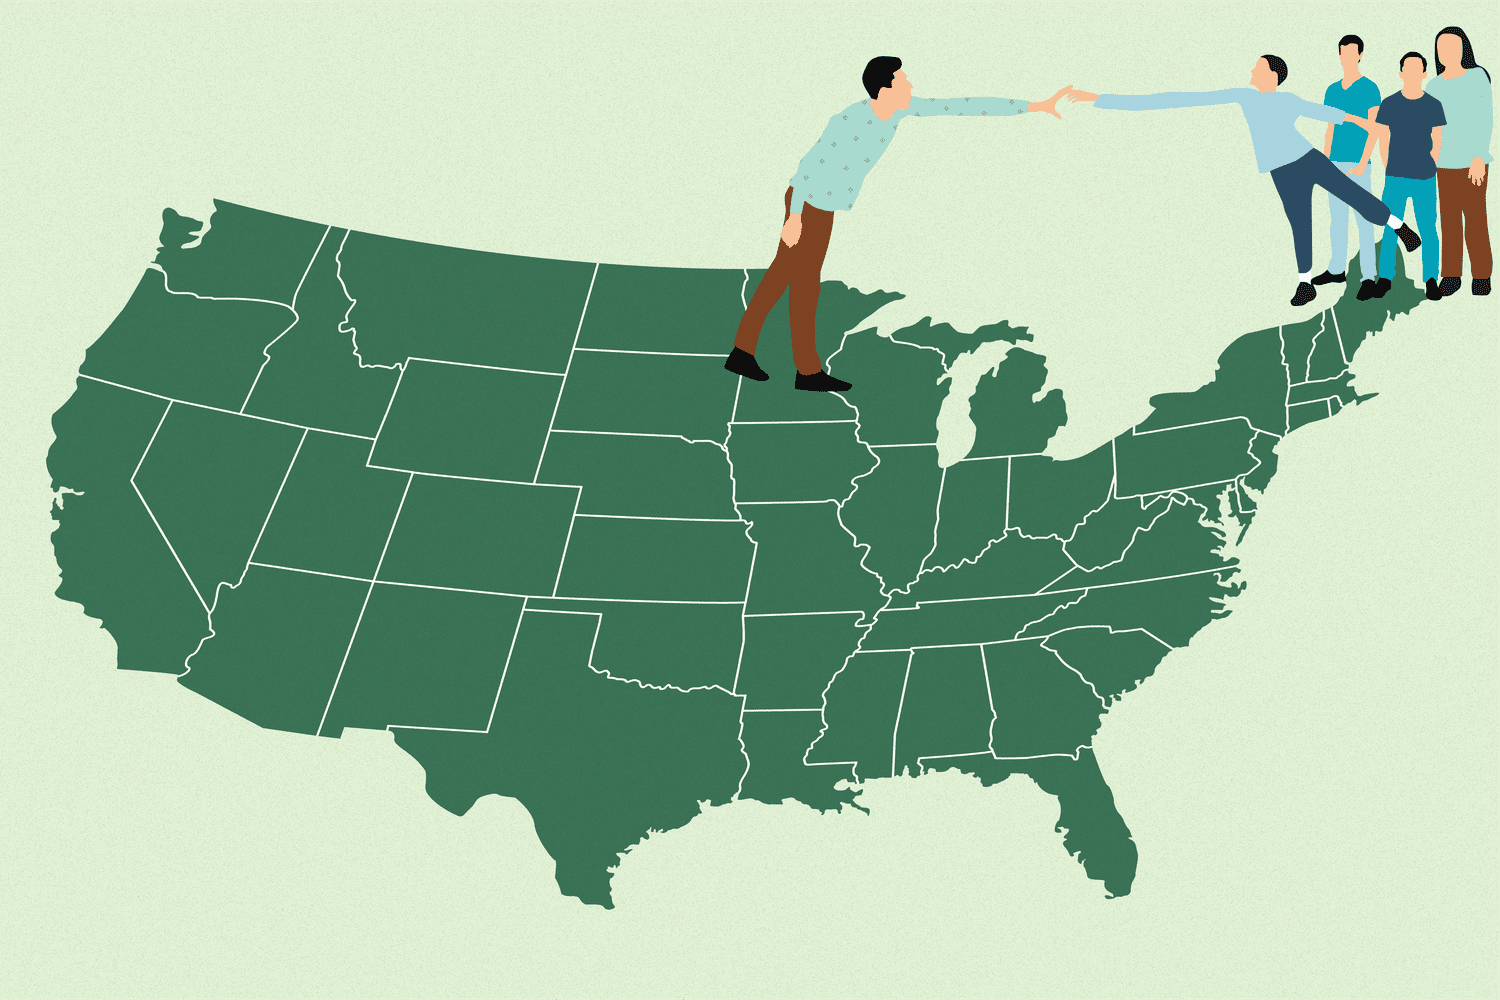 family members reaching across map of the US to hold hands